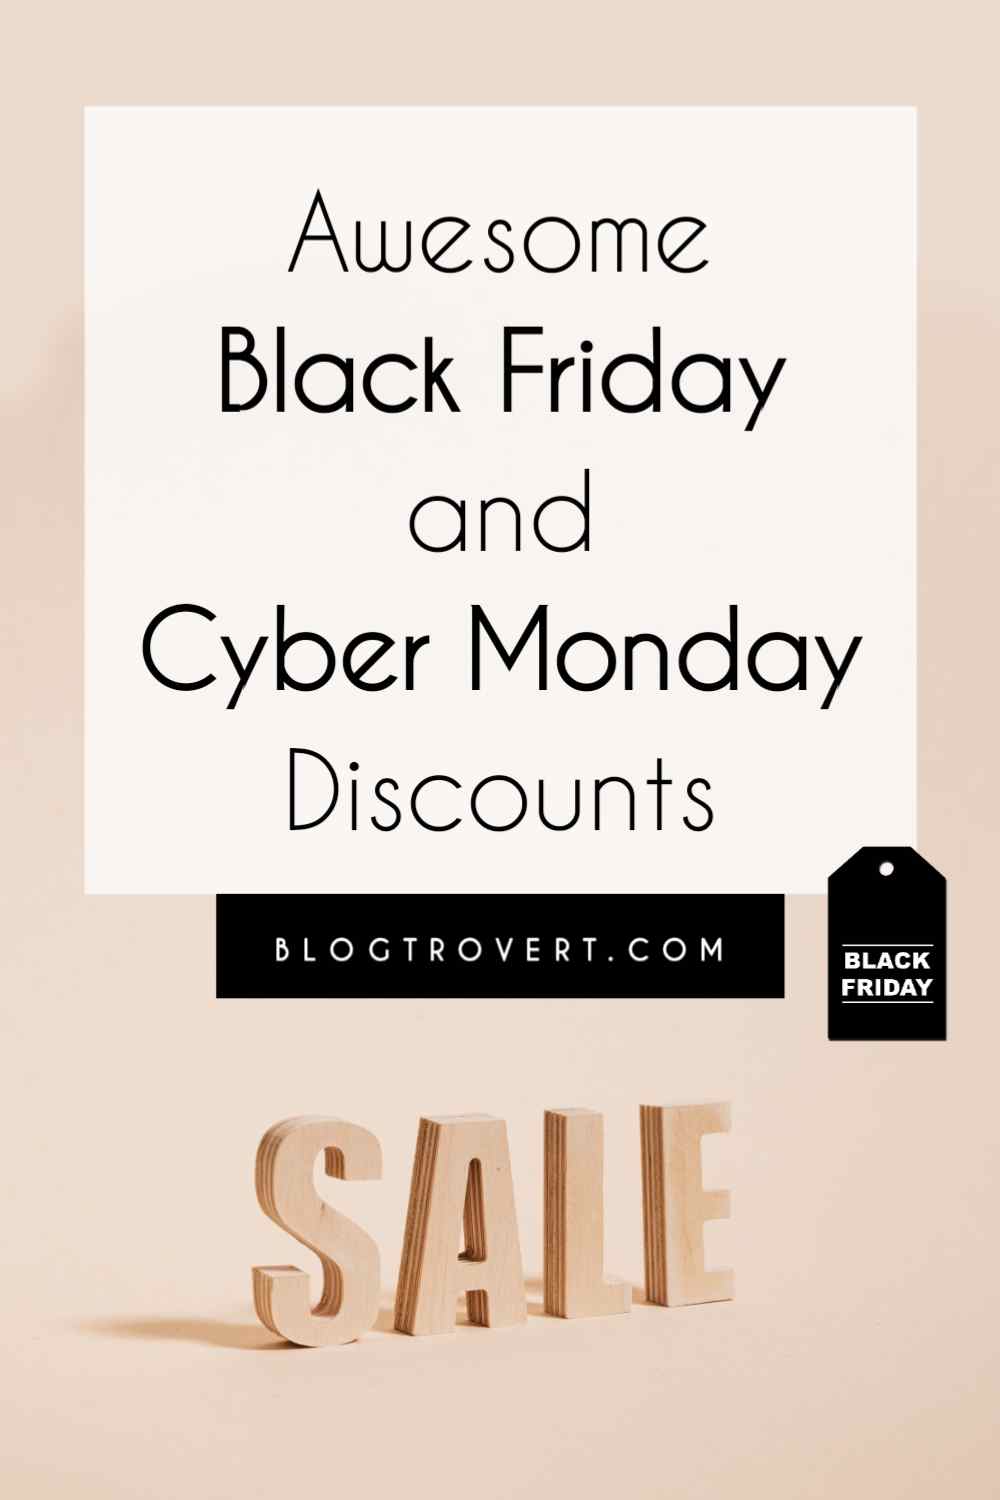 Awesome Black Friday and Cyber Monday Deals For Bloggers and Creatives 6